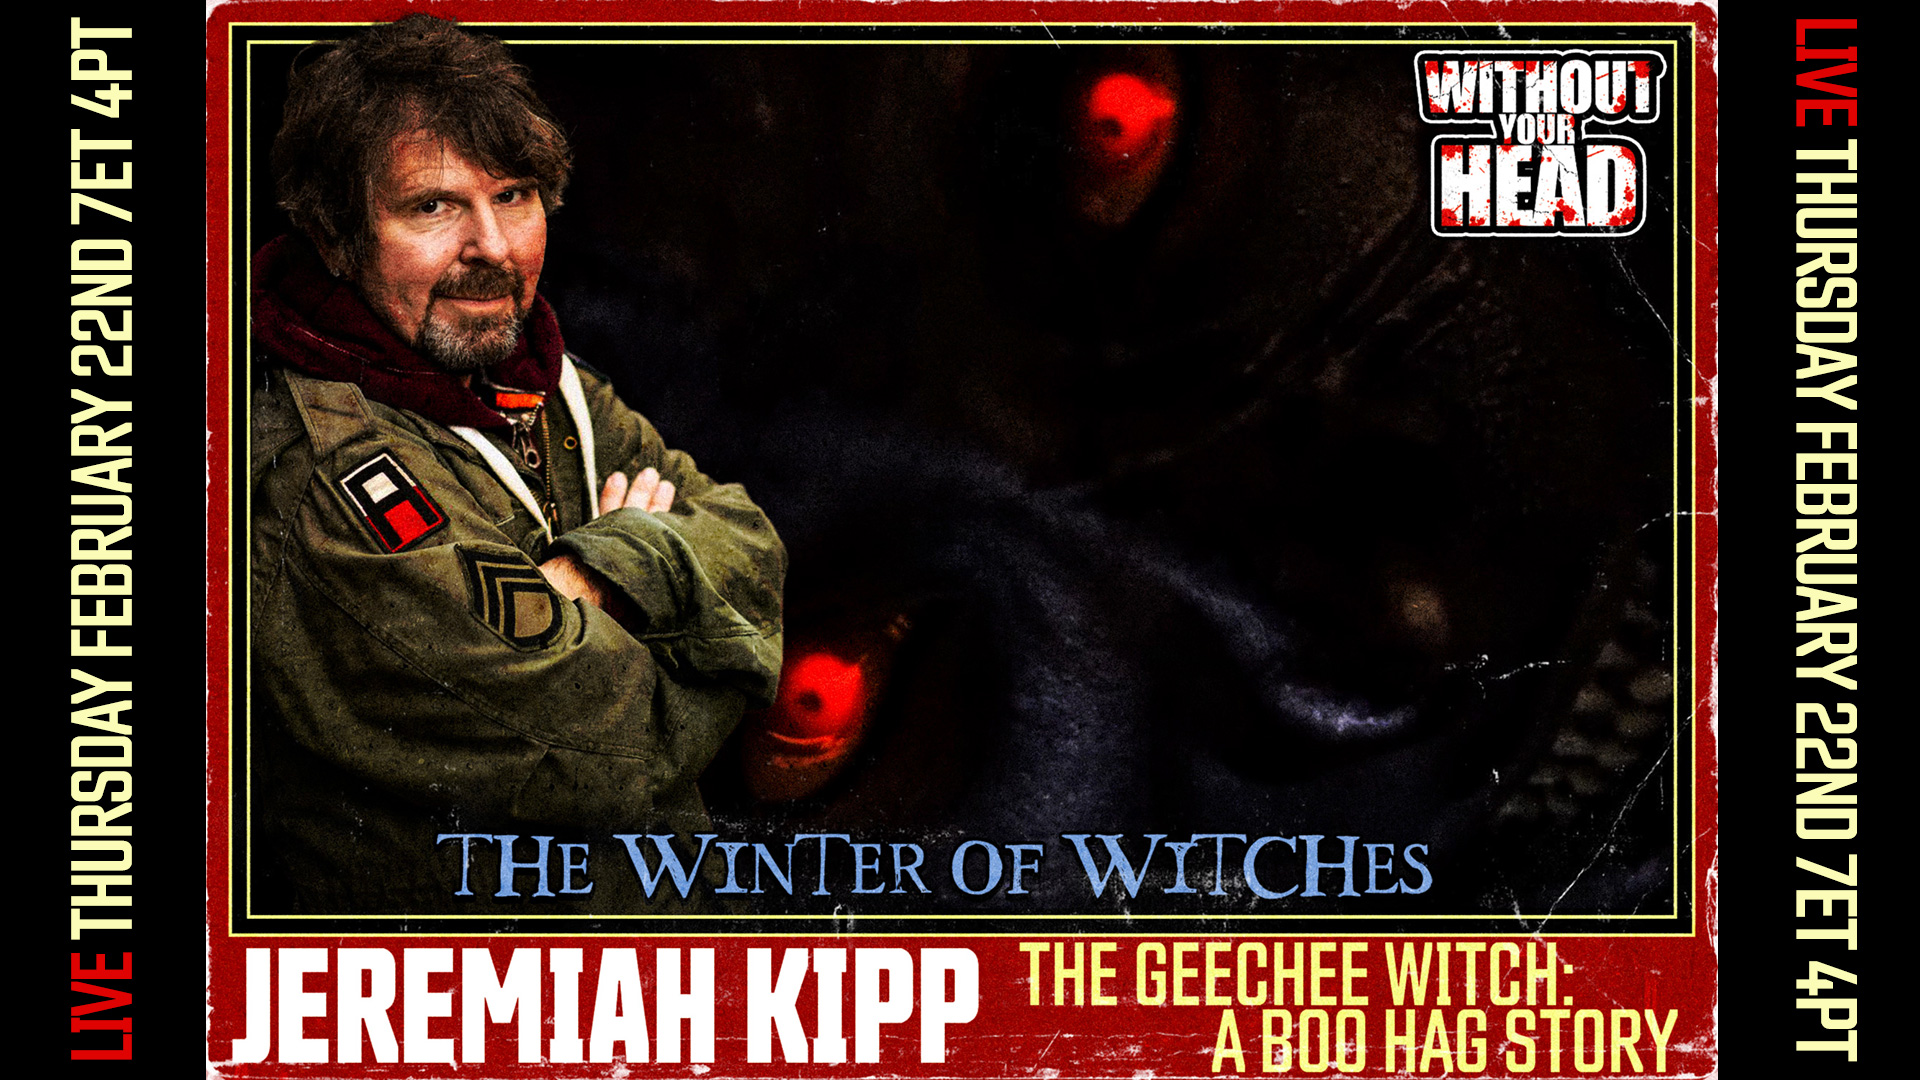 Jeremiah Kipp of The Geechee Witch: A Boo Hag Story!